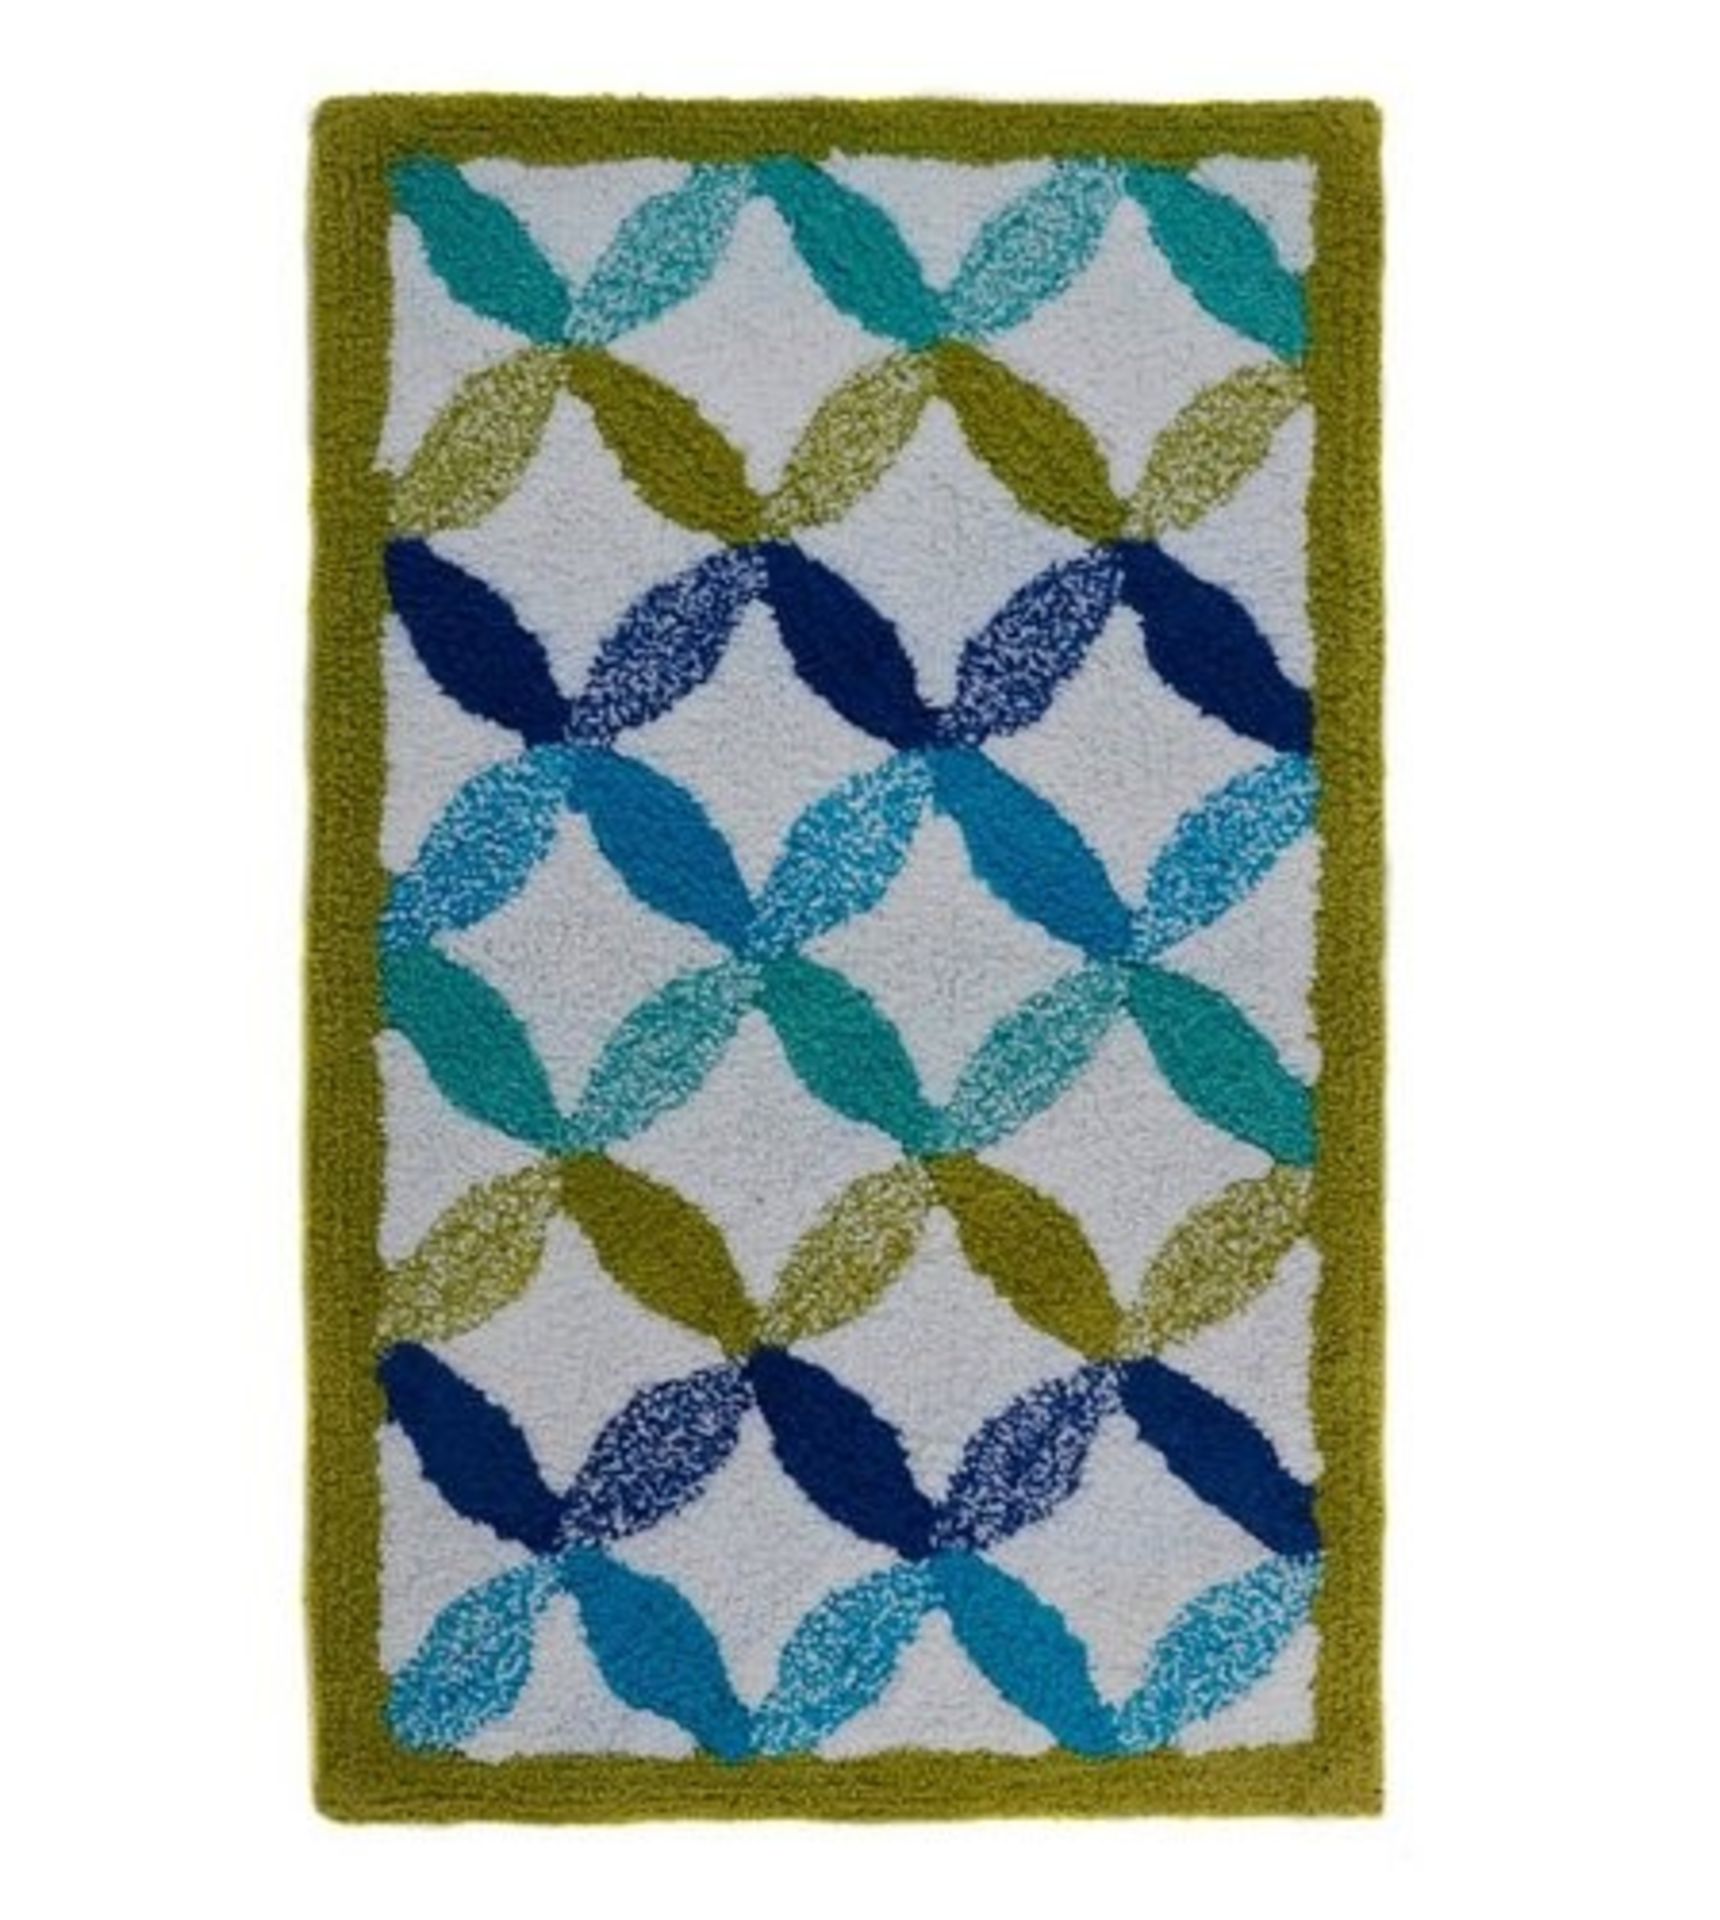 1 PACKAGED CAMDEN BATH MAT IN TEAL (VIEWING HIGHLY